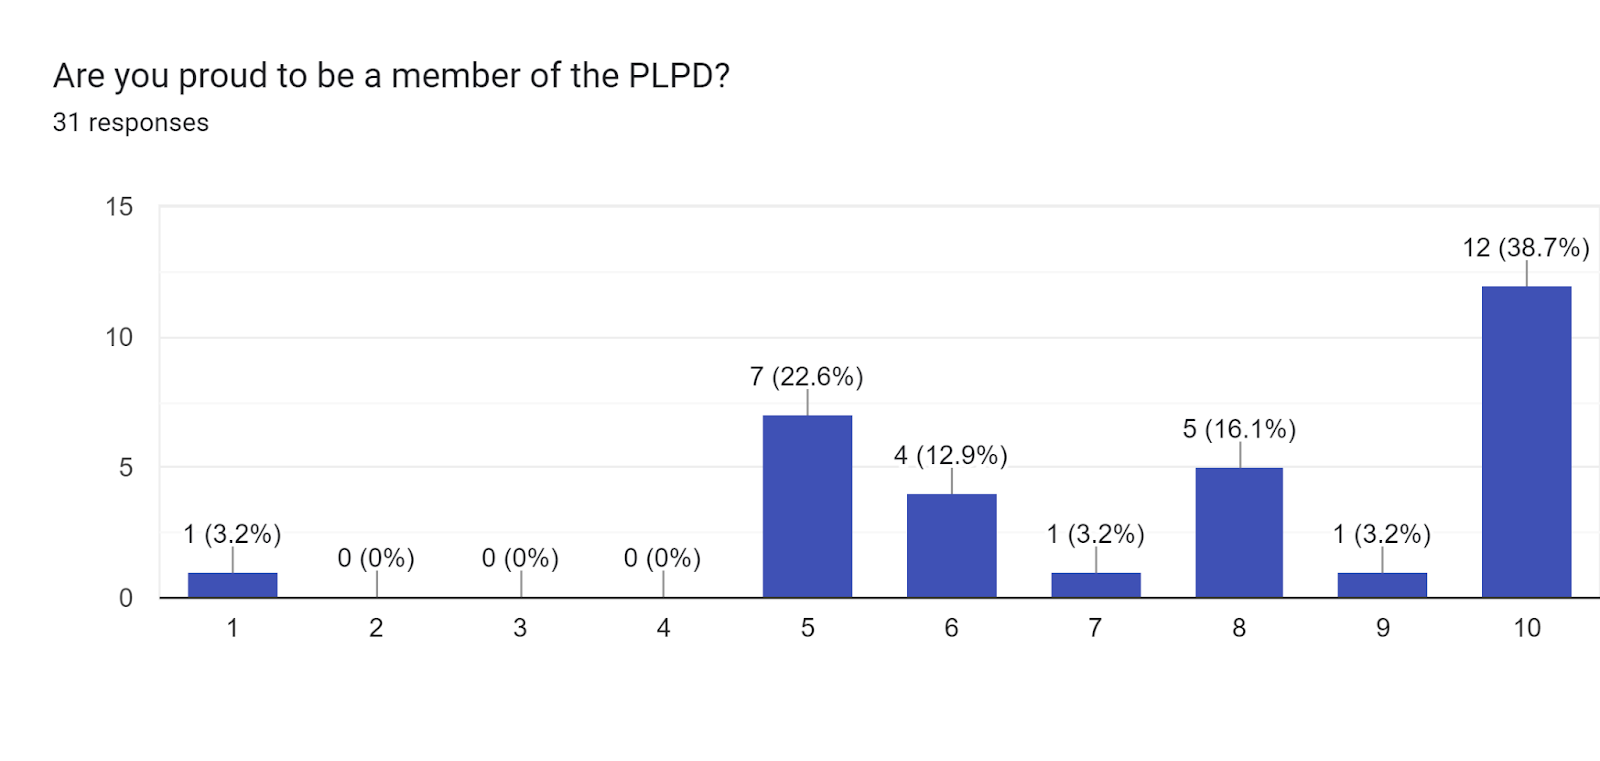 Forms response chart. Question title: Are you proud to be a member of the PLPD?. Number of responses: 31 responses.